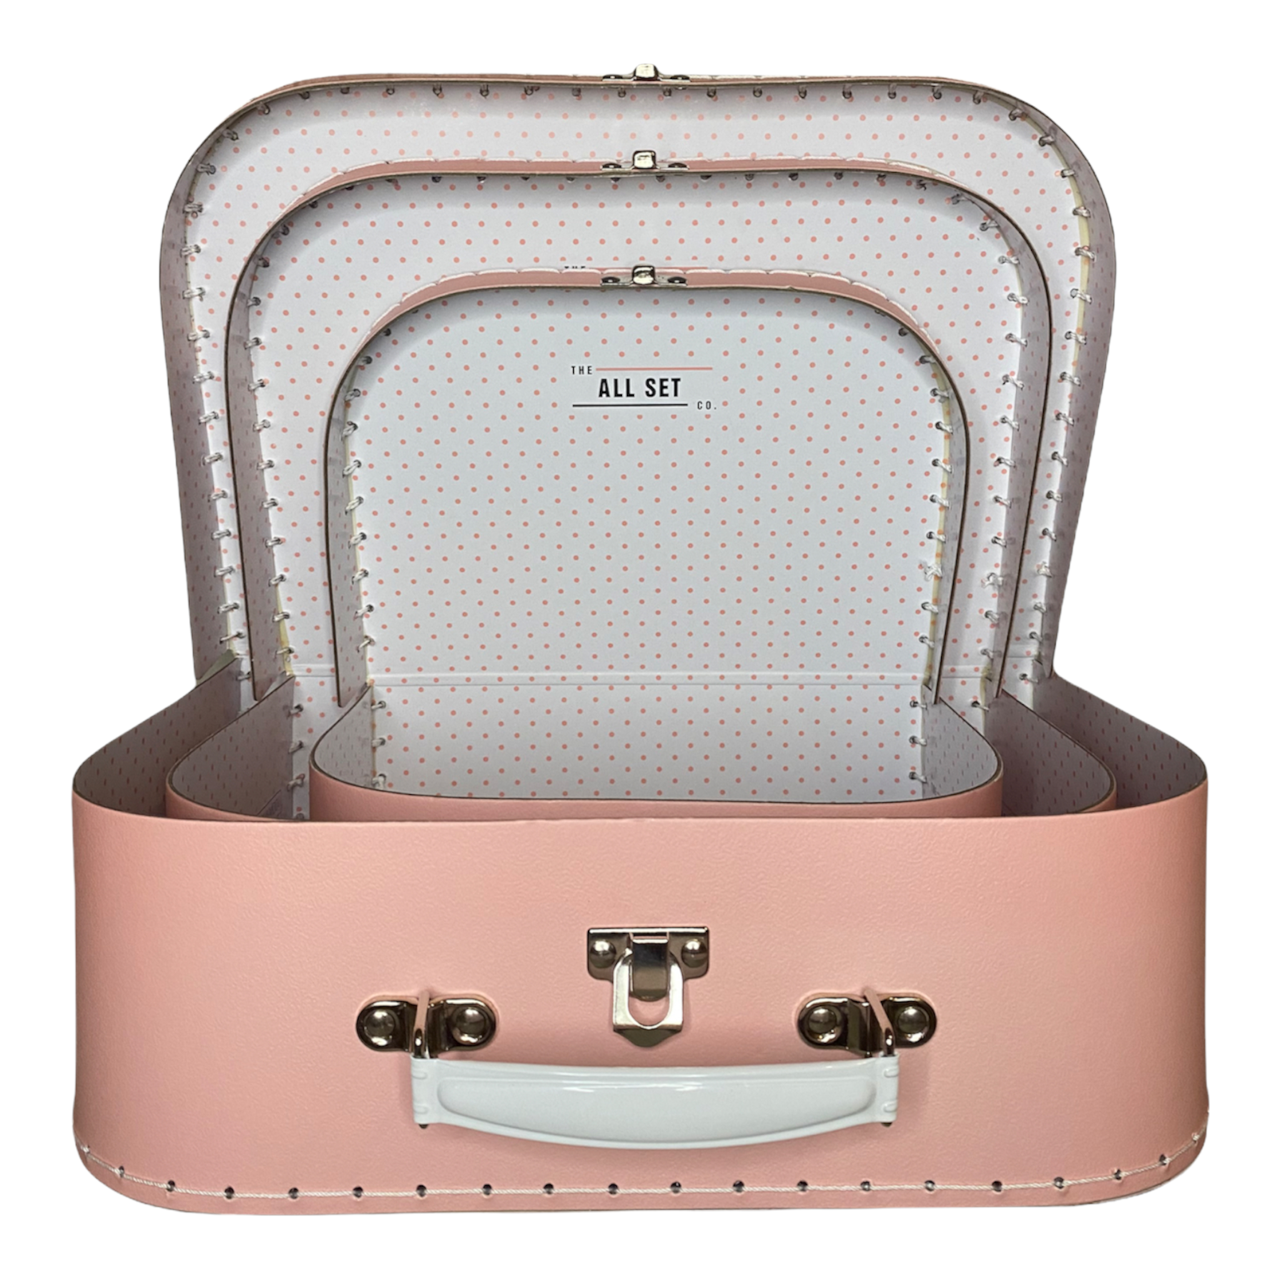 Pink Suitcase Style Gift Box for Keepsakes, Arts and Crafts, Toys, Wedding, Birthday, and More!